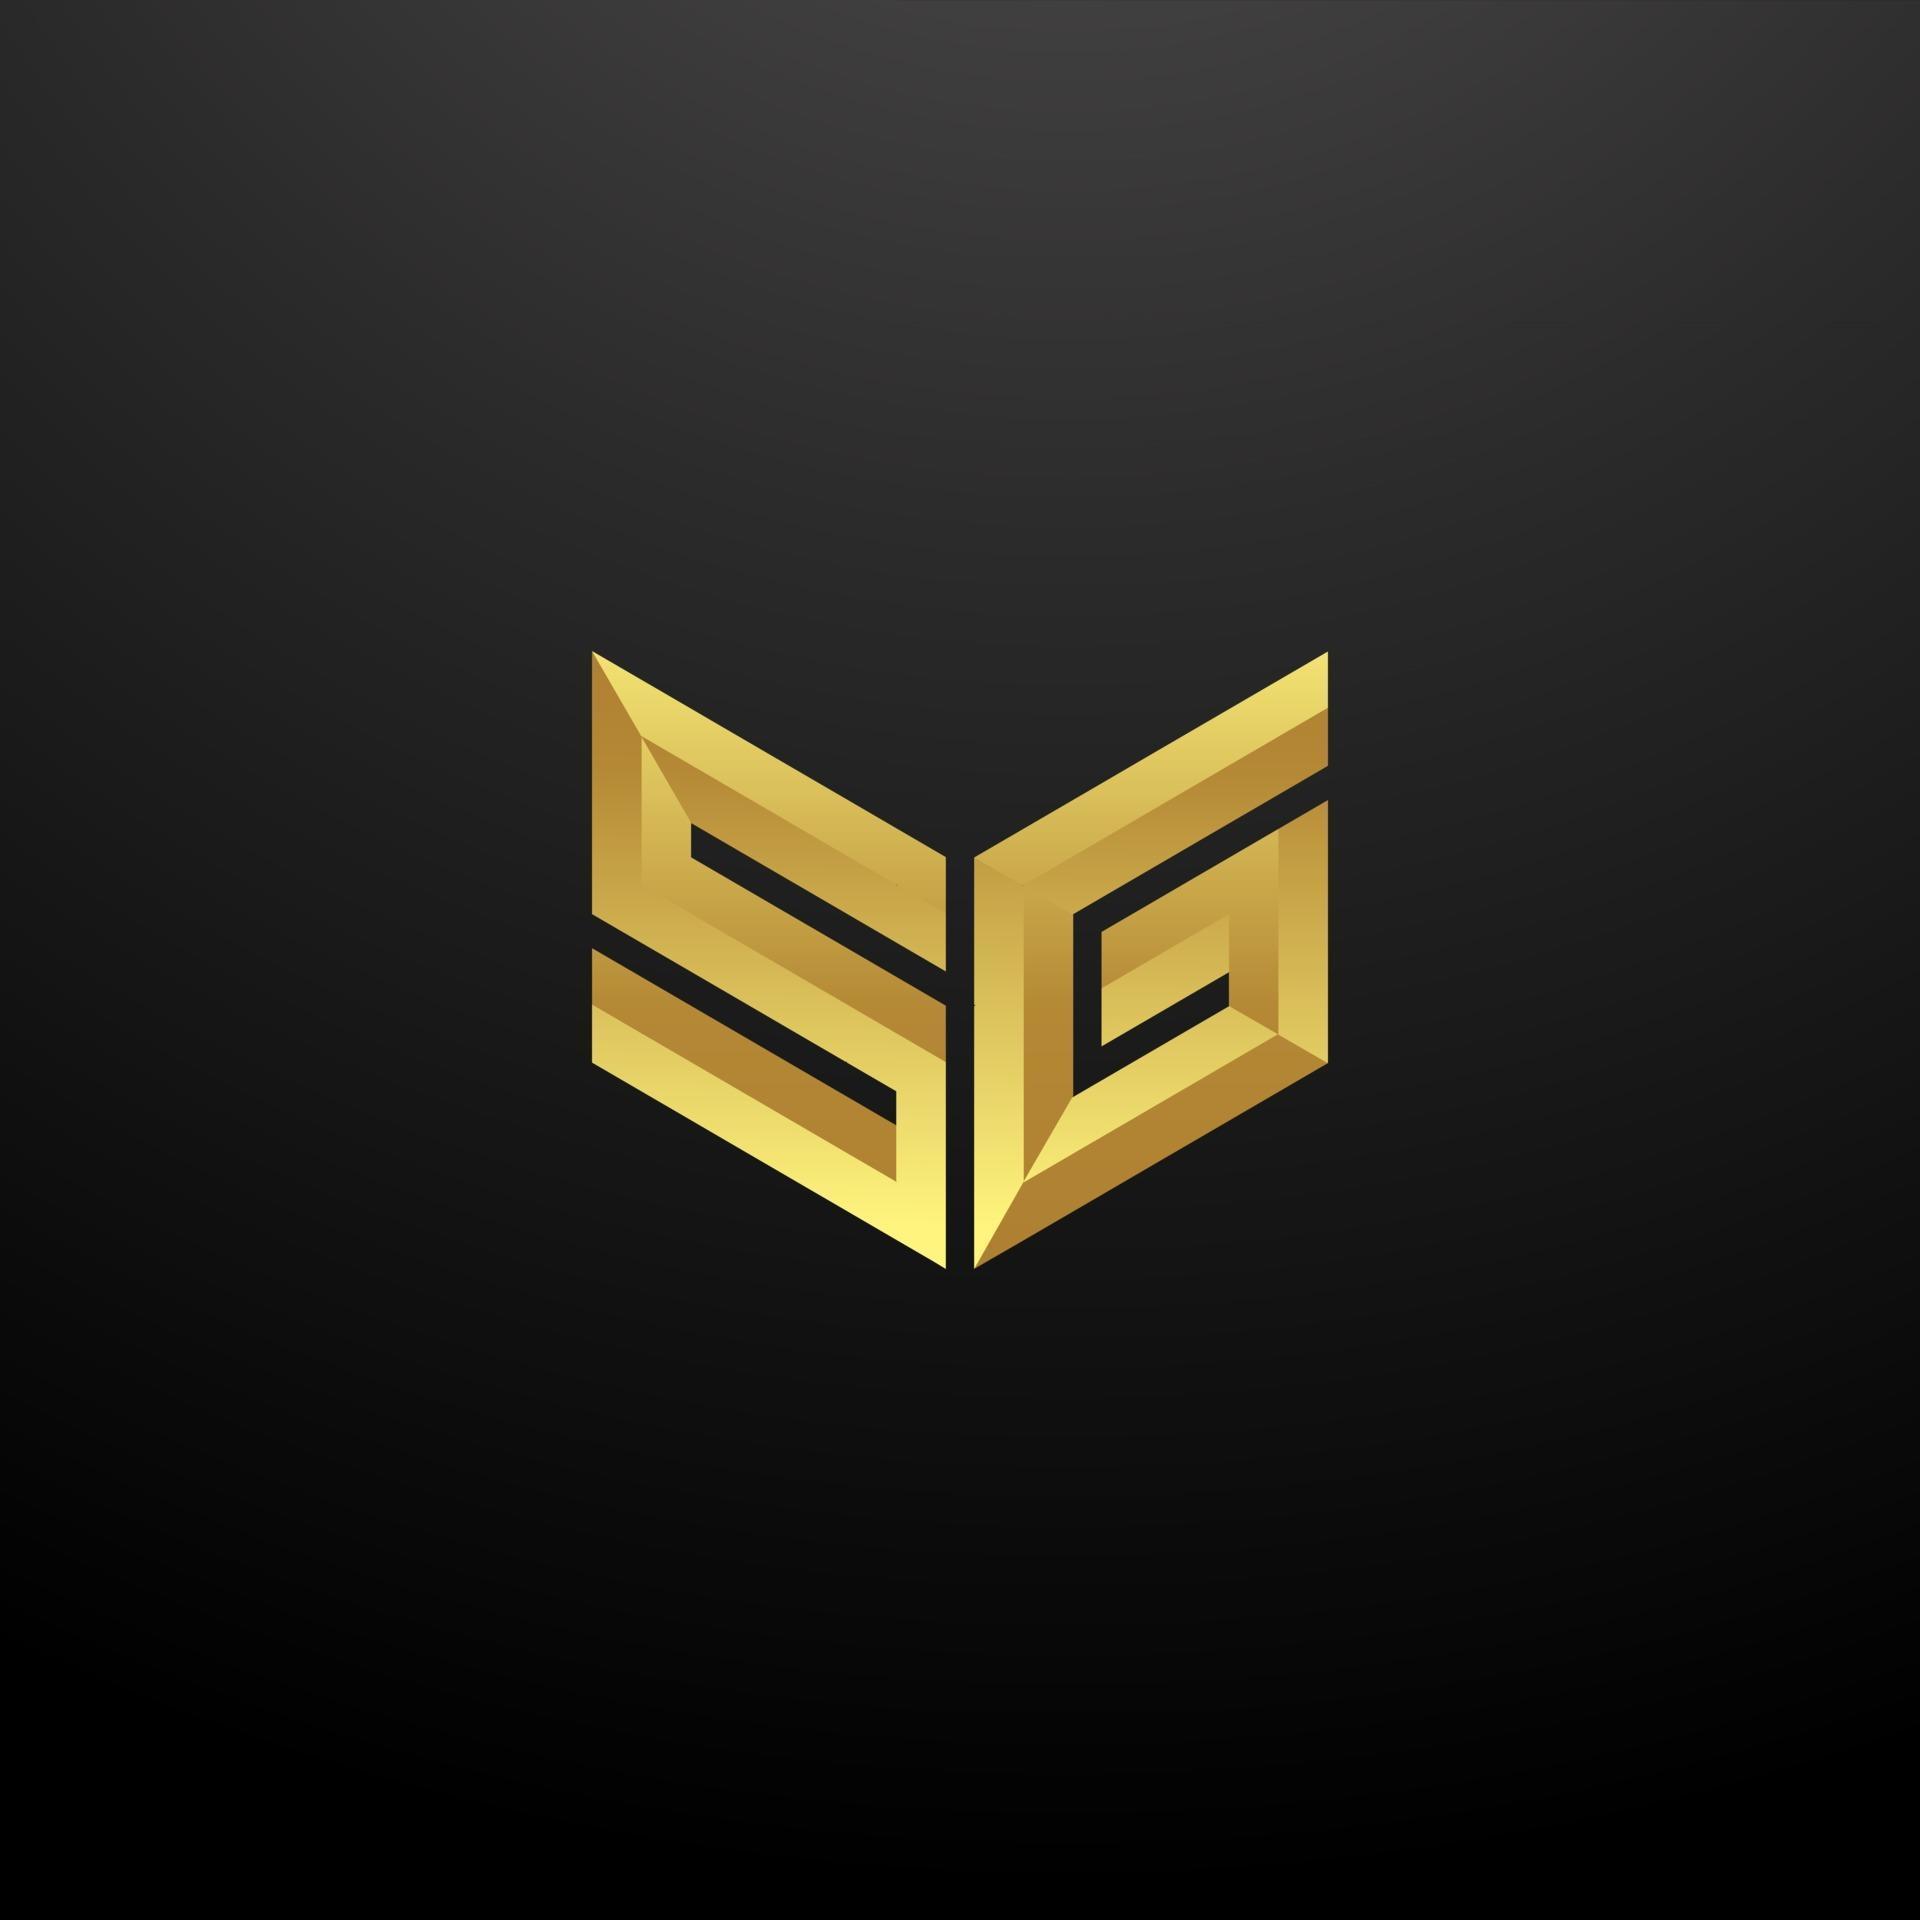 SG Logo Monogram Letter Initials Design Template with Gold 3d texture